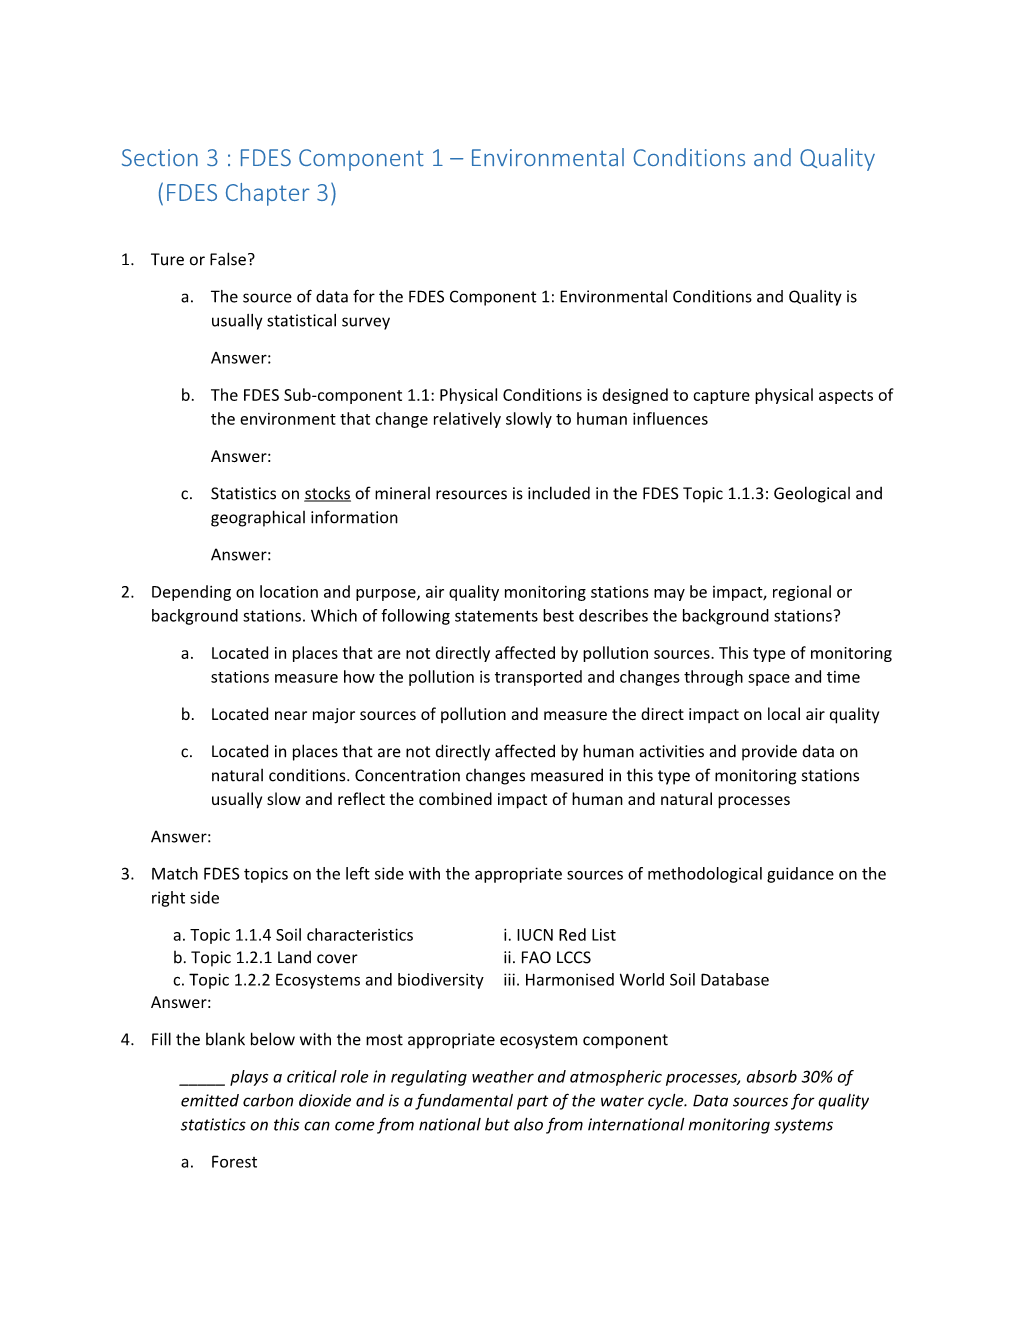 Section 3 : FDES Component 1 Environmental Conditions and Quality (FDES Chapter 3)